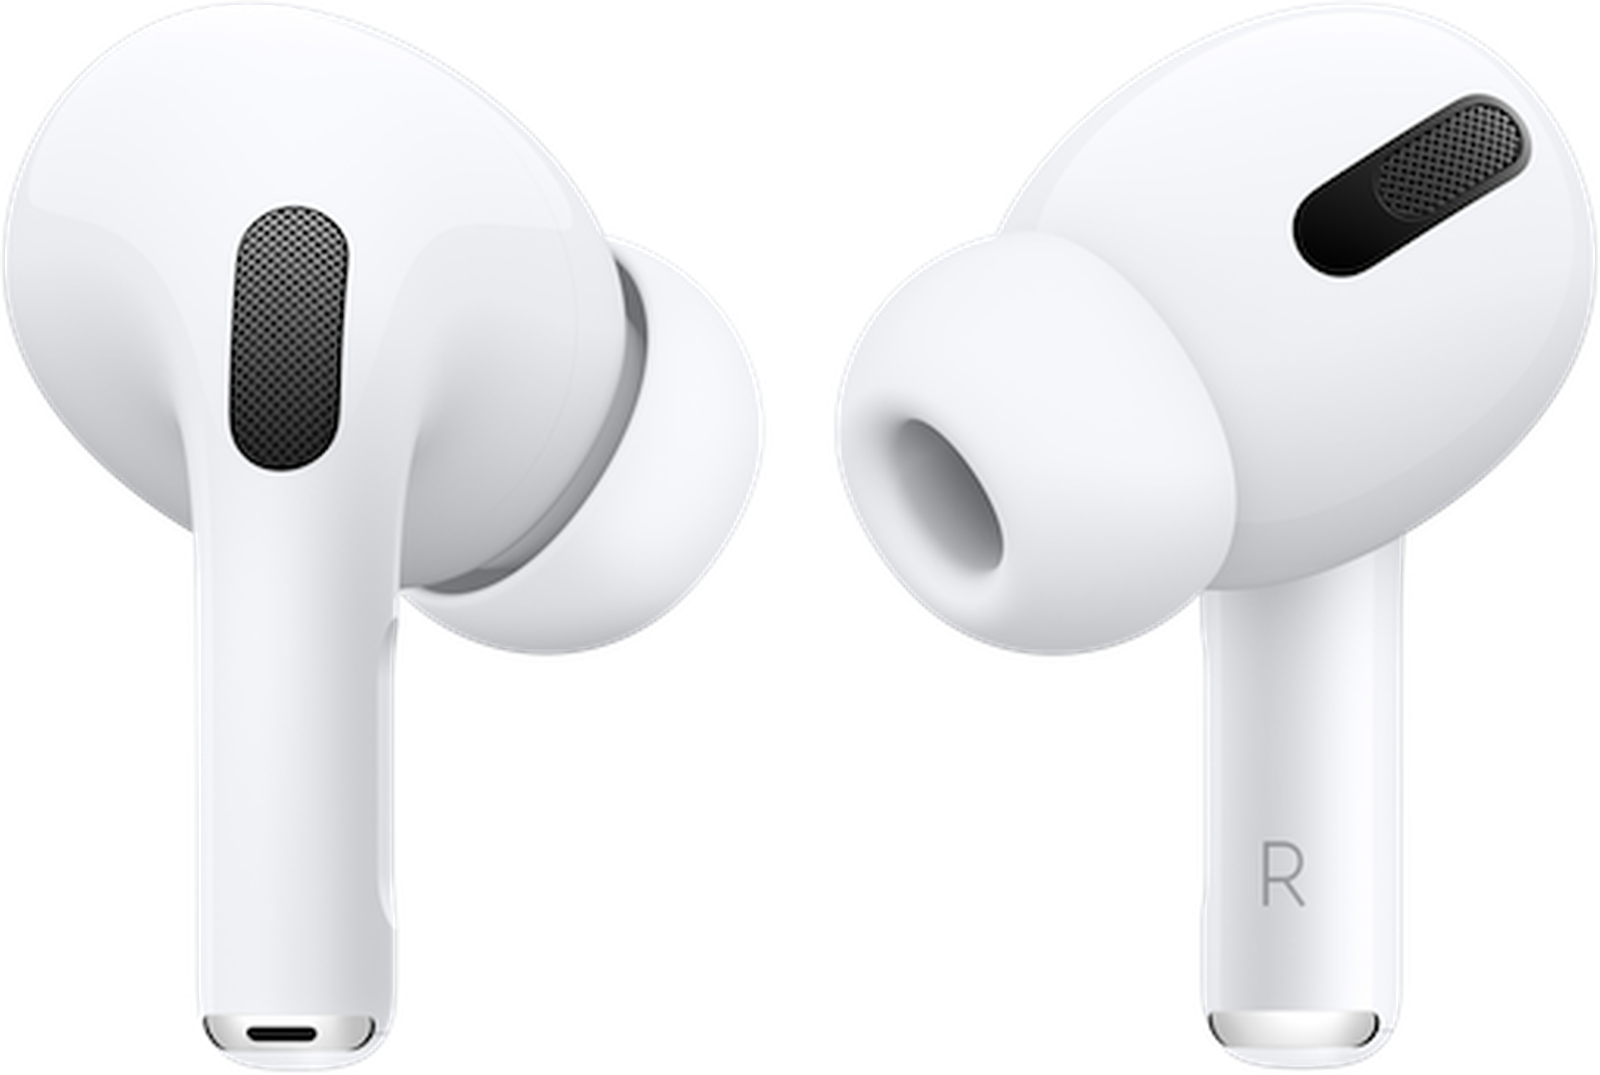 AirPods Pro Crackling/Rattling Issues: - MacRumors